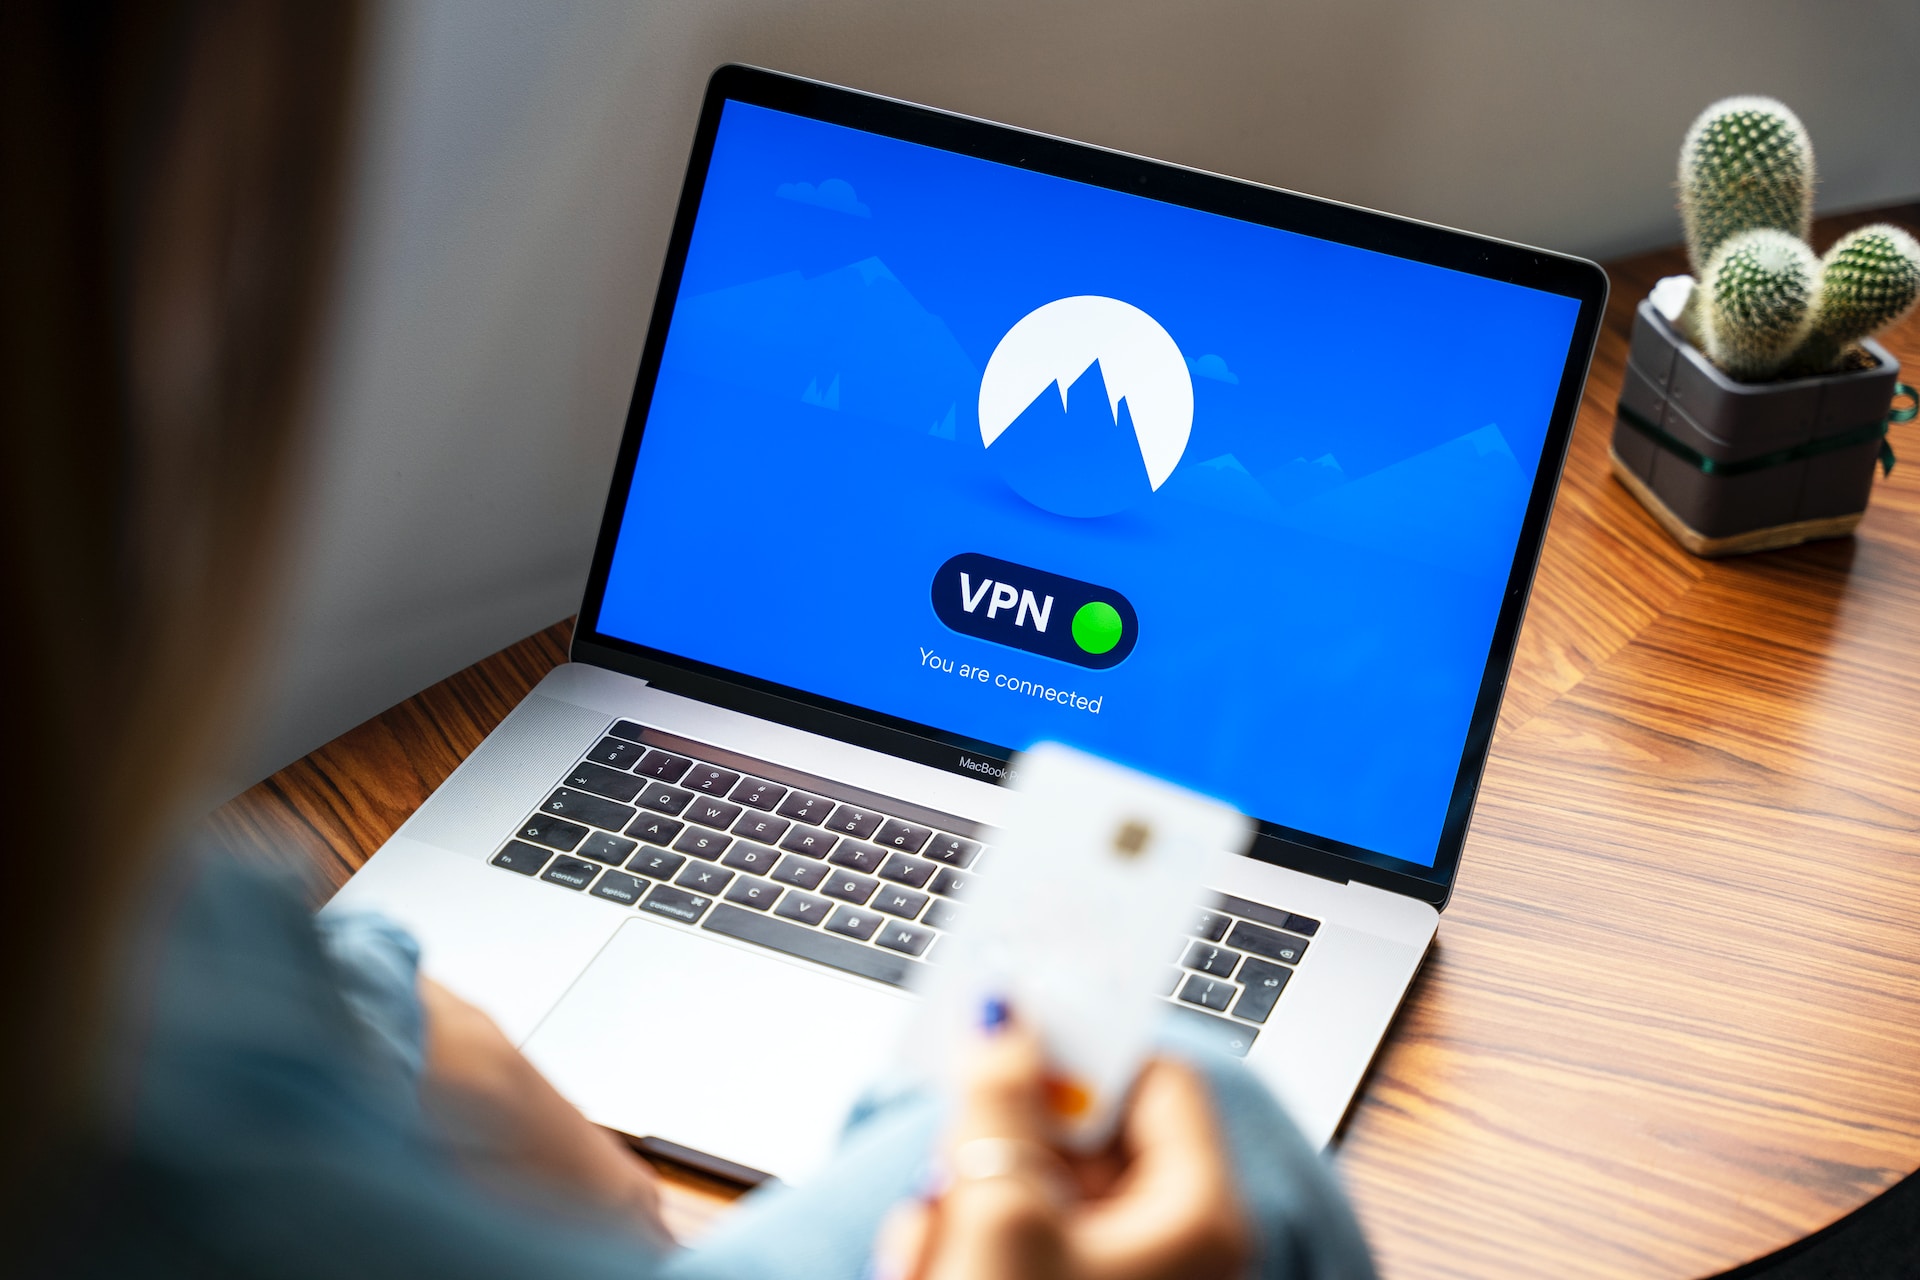 Stay Safe Online With iTop VPN's Powerful PC